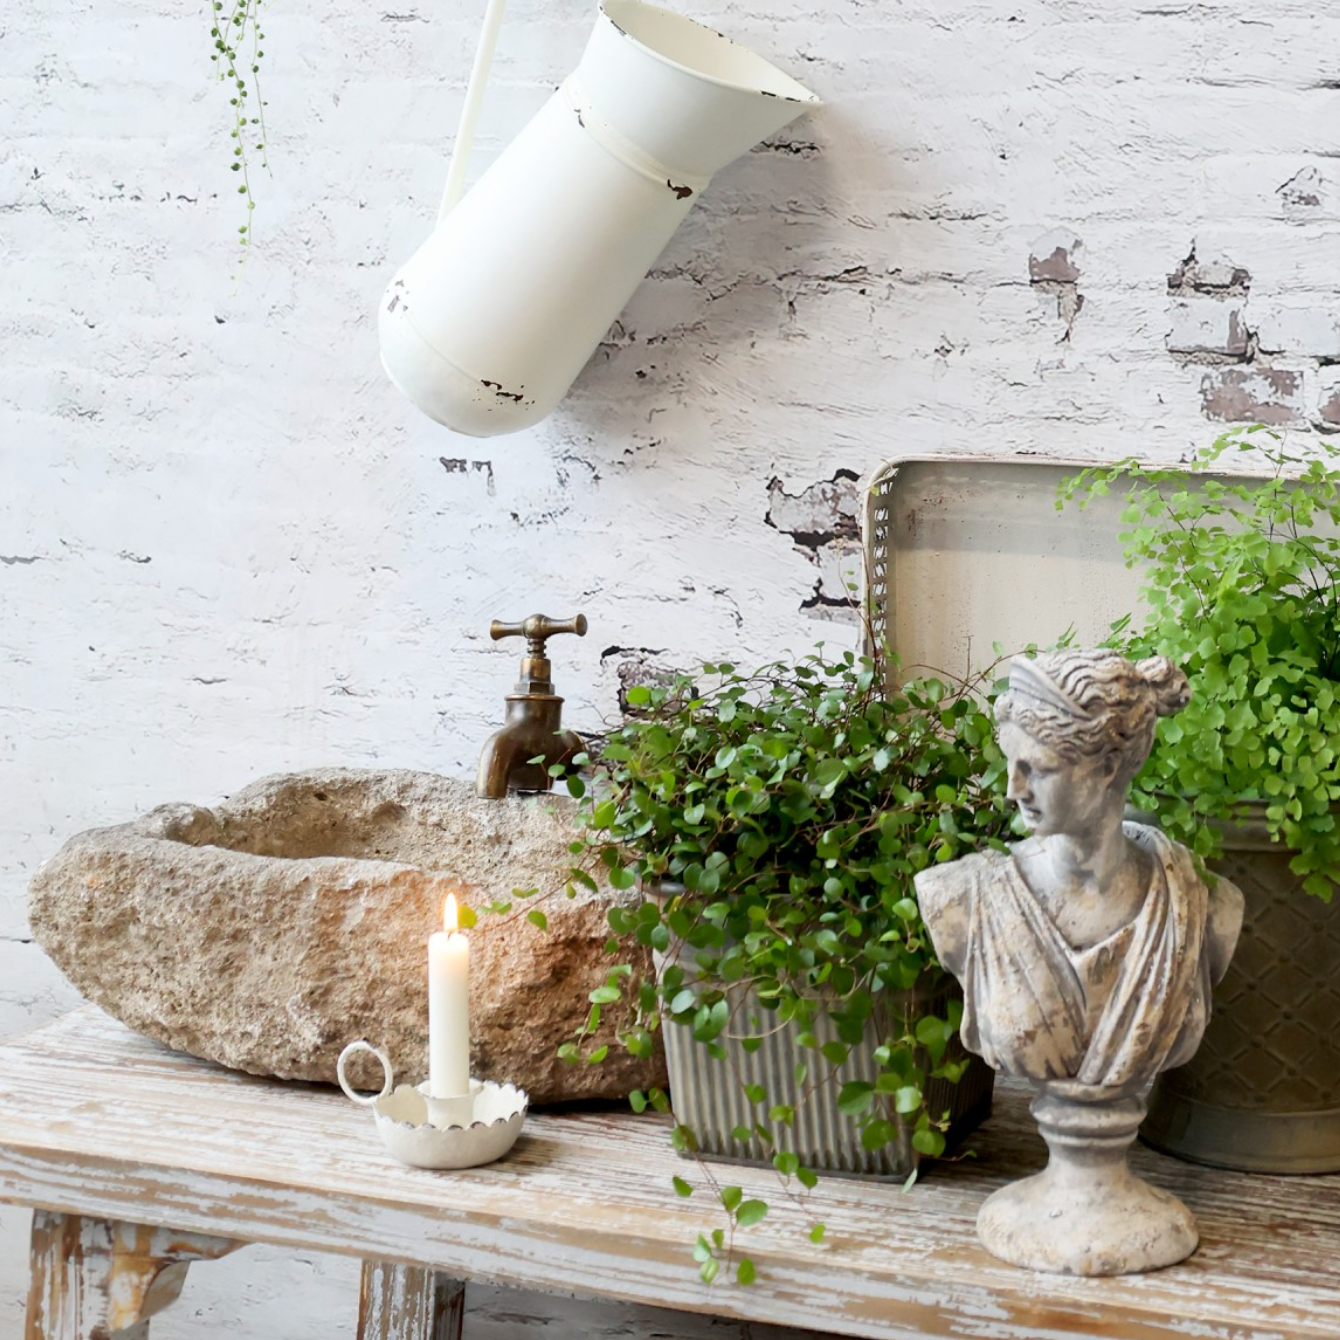 Candle Stick Holder with antique white finish and lit dinner candle. next to stone sink with plants.